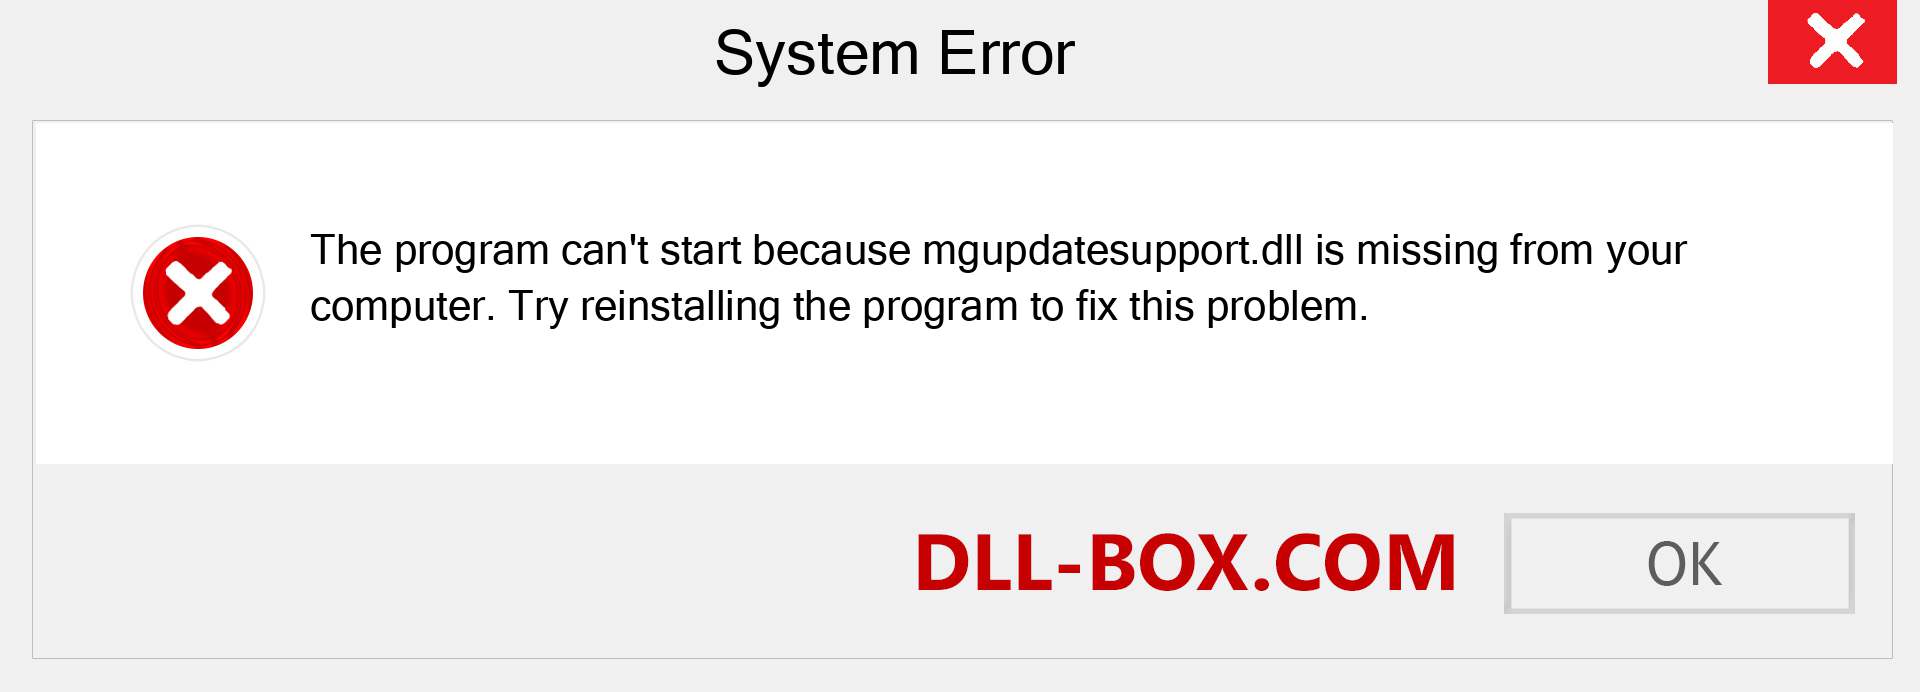  mgupdatesupport.dll file is missing?. Download for Windows 7, 8, 10 - Fix  mgupdatesupport dll Missing Error on Windows, photos, images